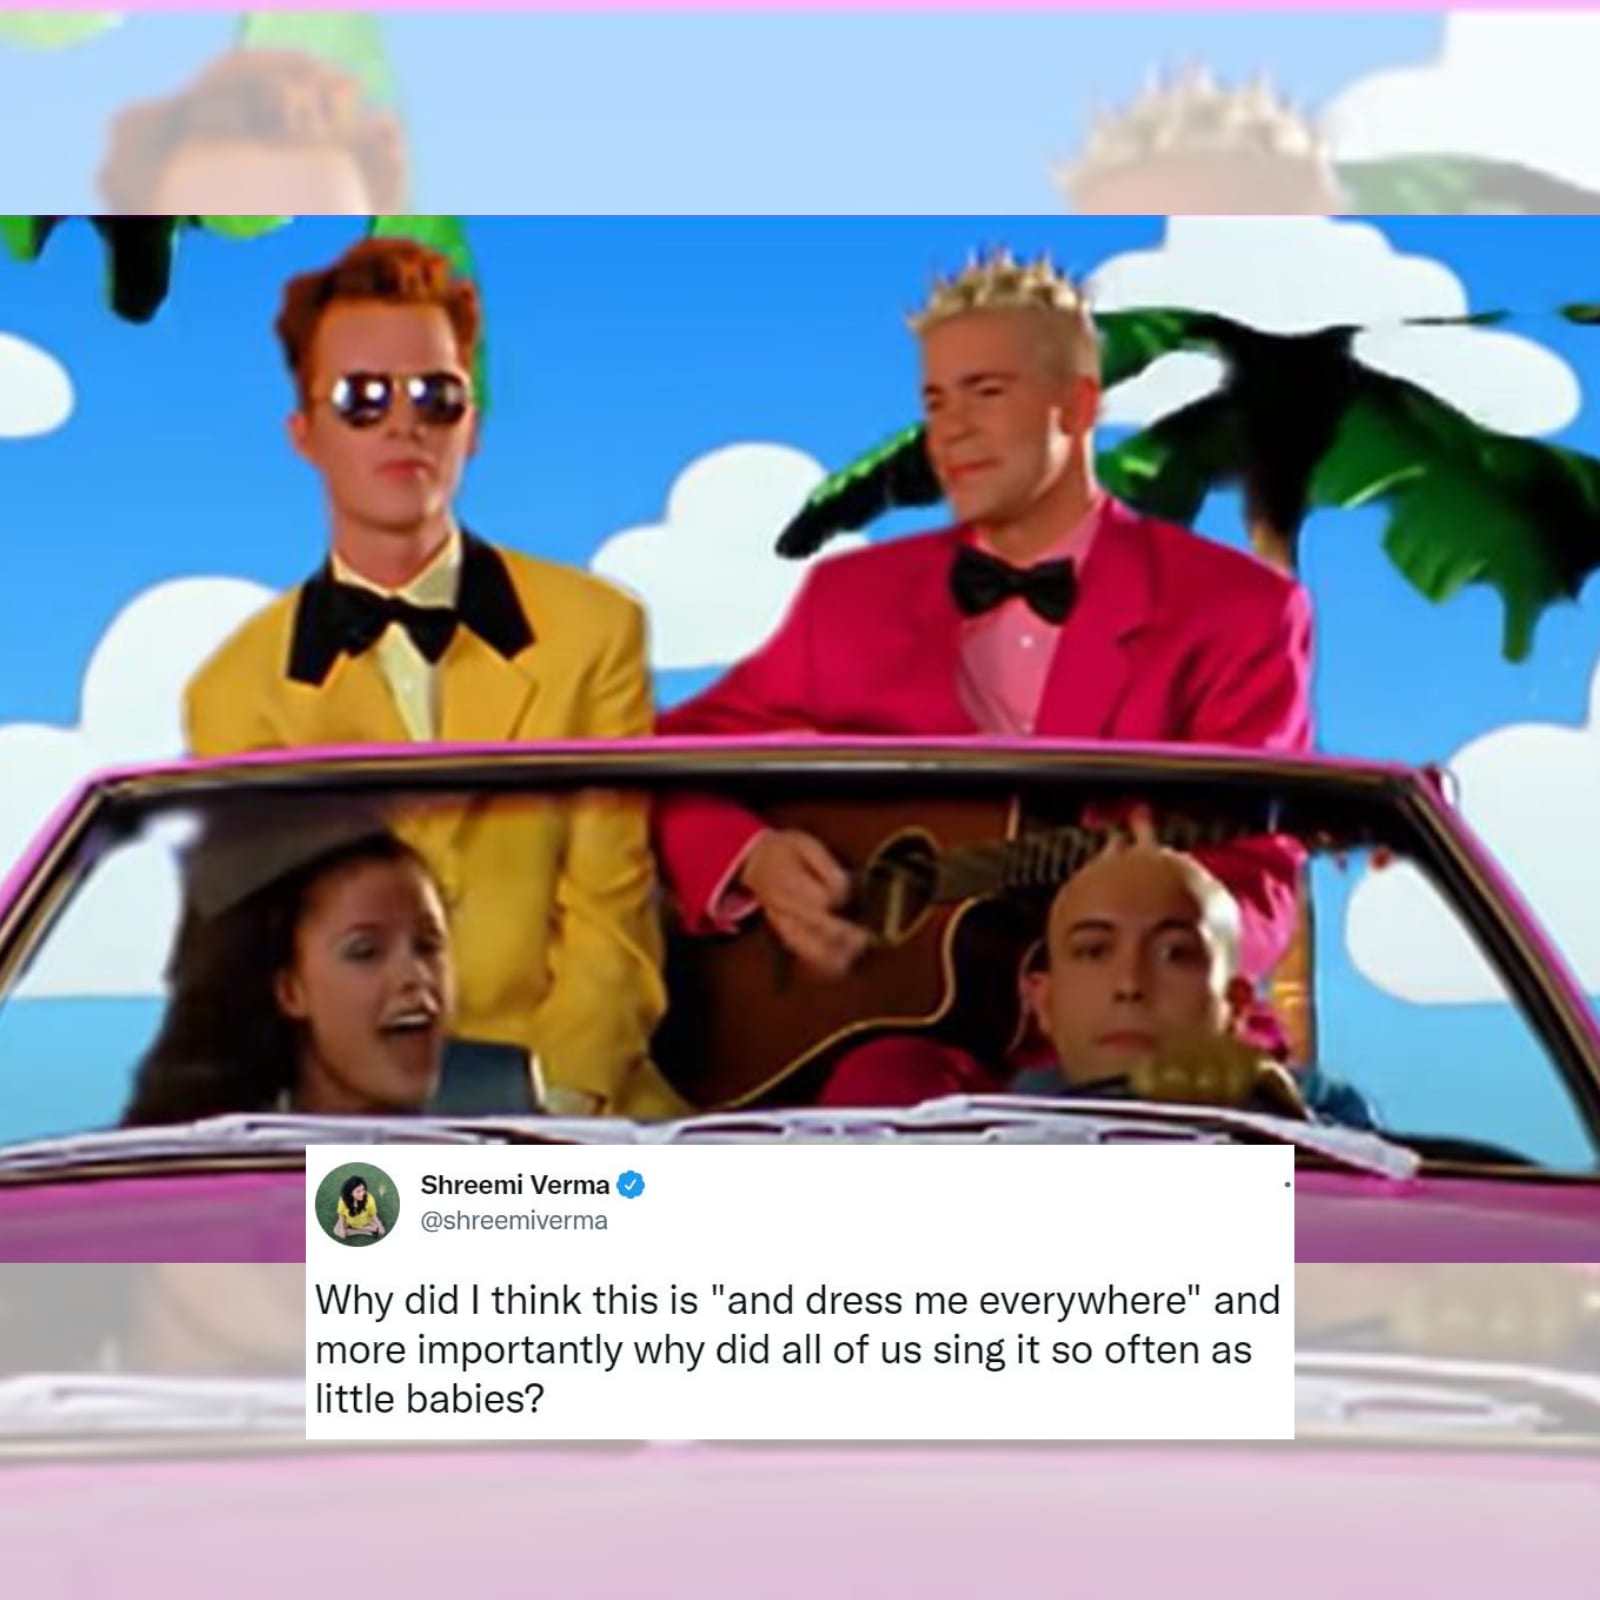 Millennials Are Only Now Getting Real Lyrics of 'Barbie Girl' and It's Peak